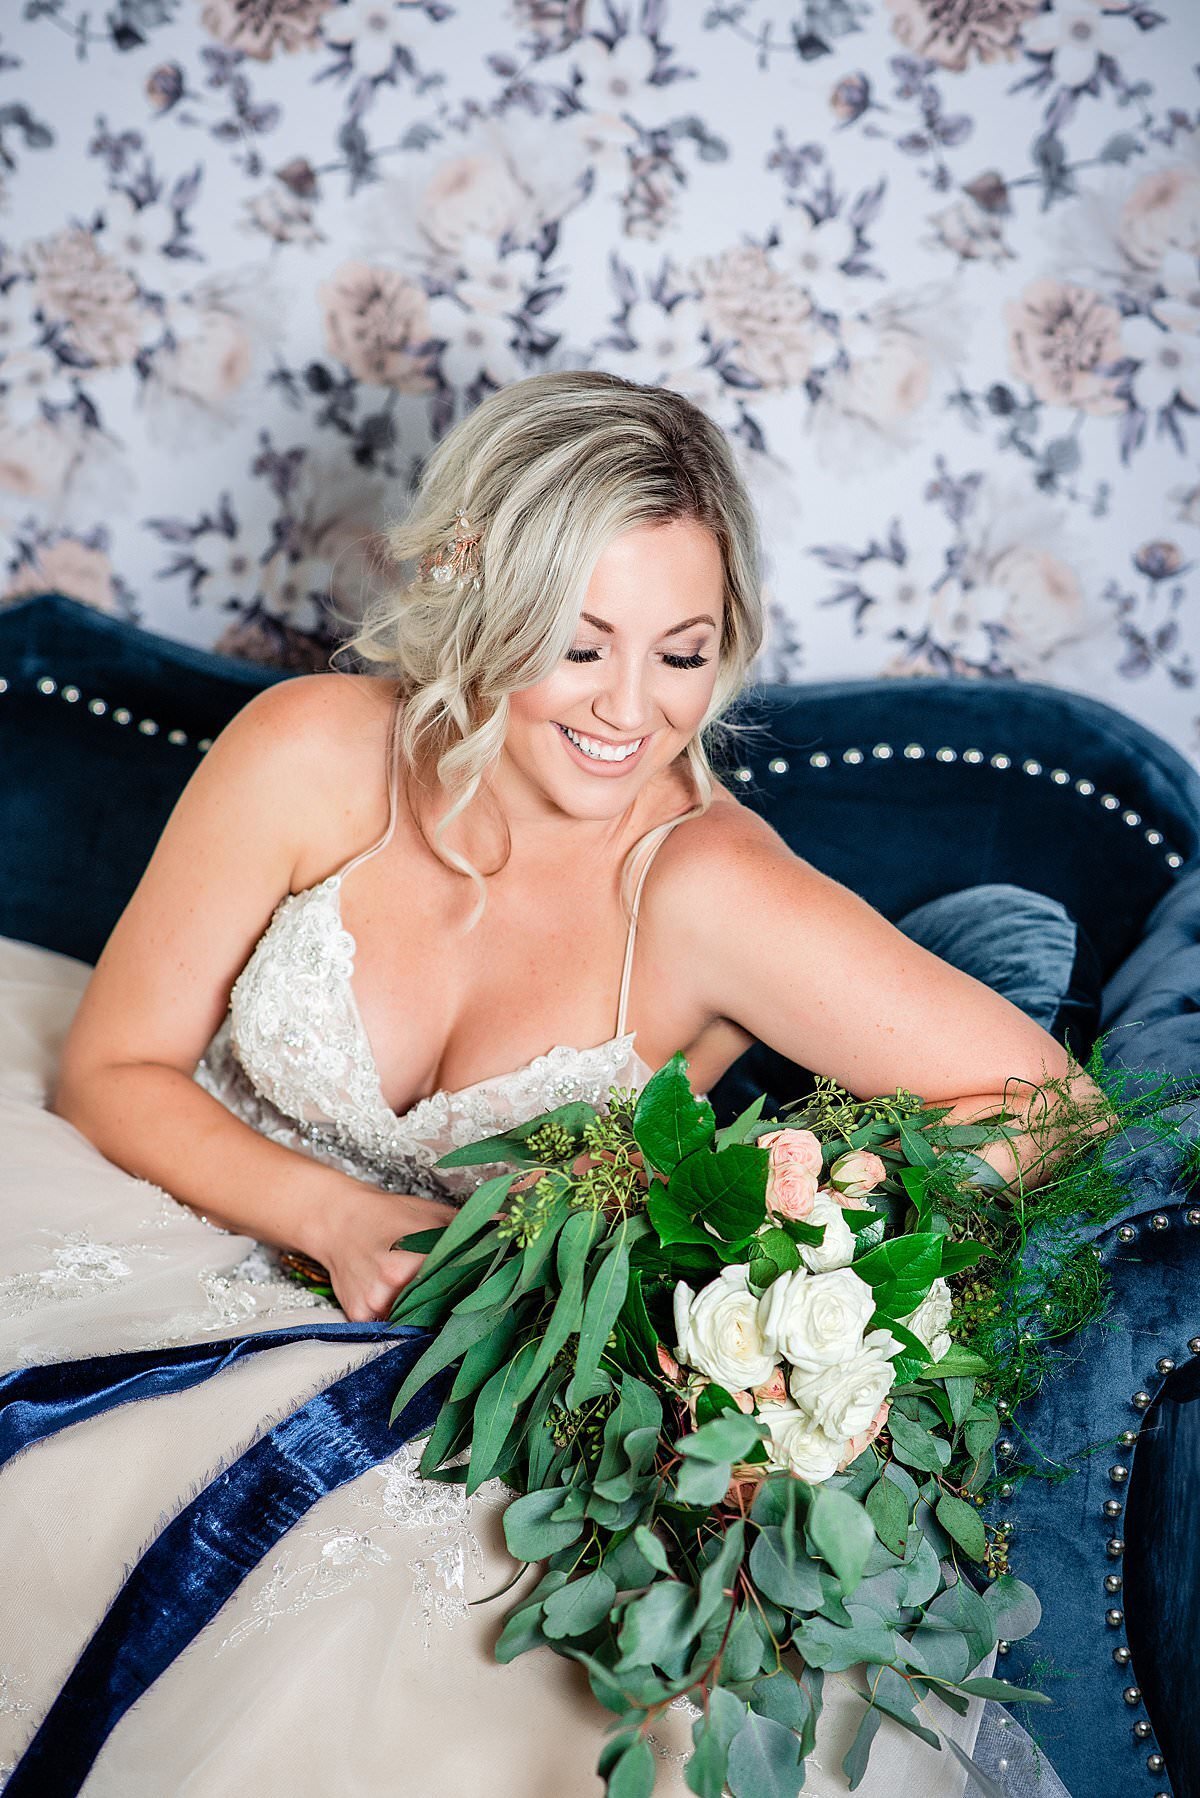 Bride sitting on a blue velvet couch holding her greenery heavy bouquet with floral wallpaper behind her